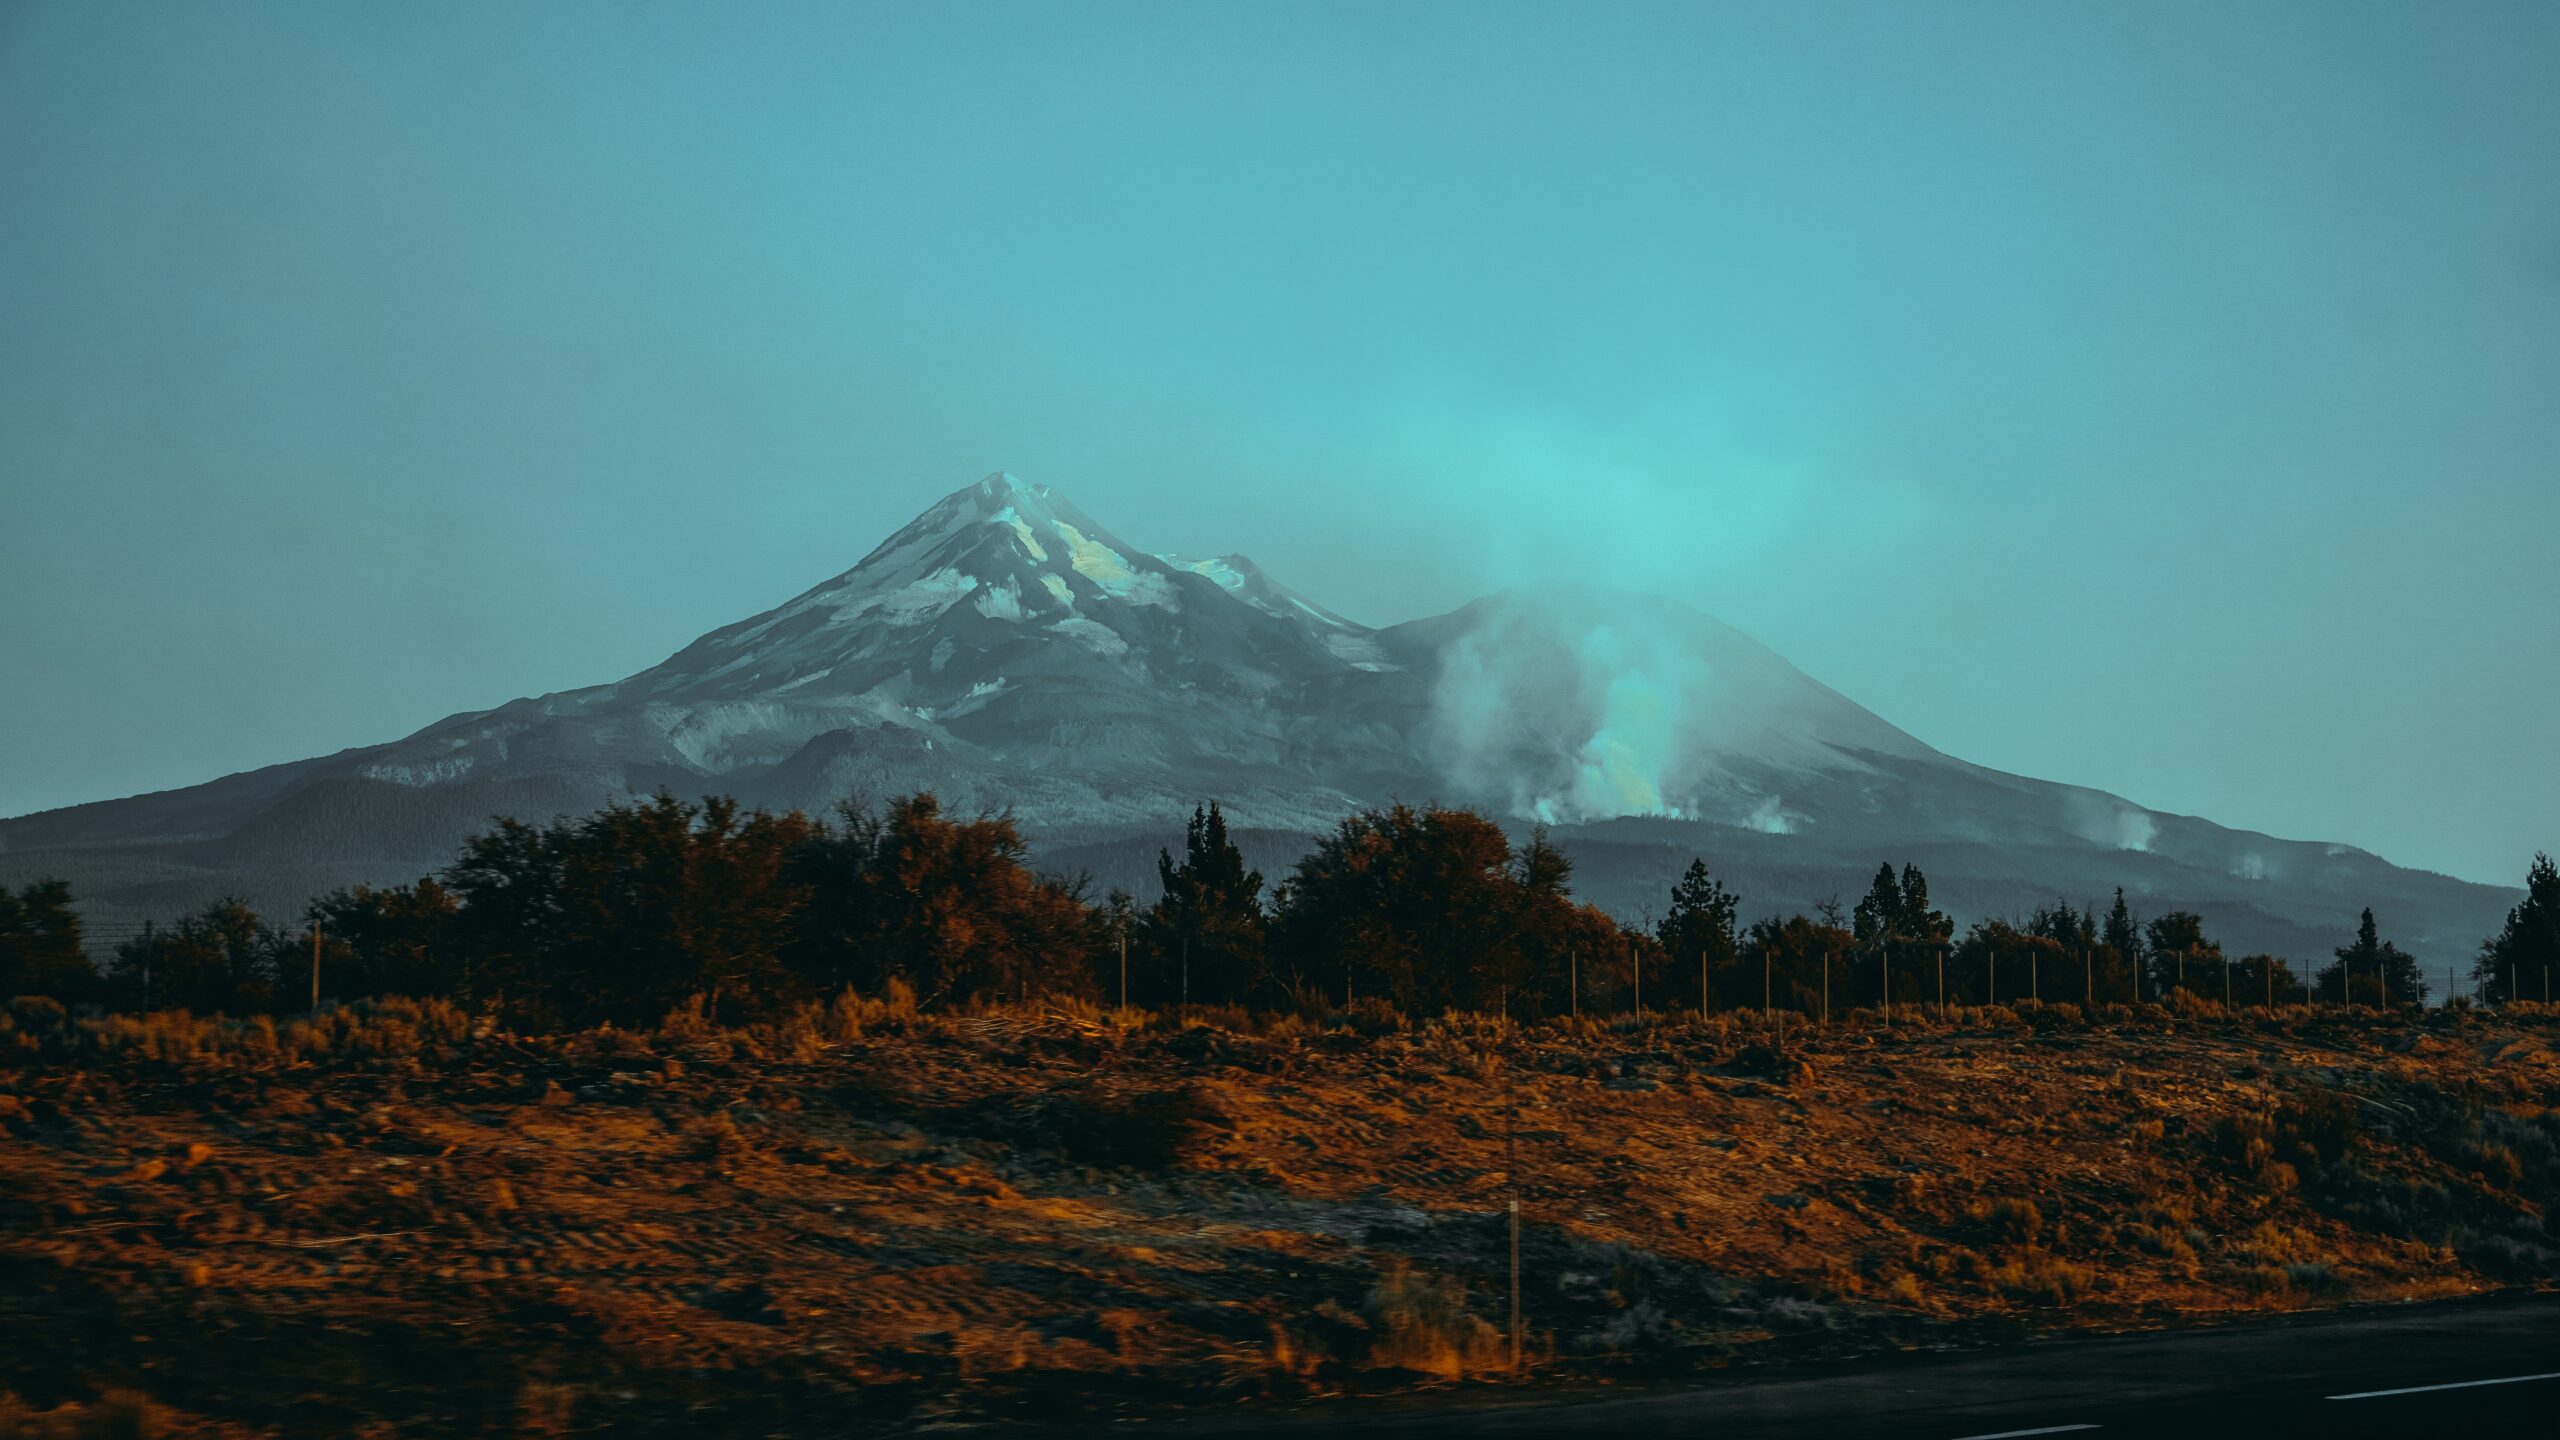 Can I Have A Campfire At The Campgrounds Near Mount Shasta?